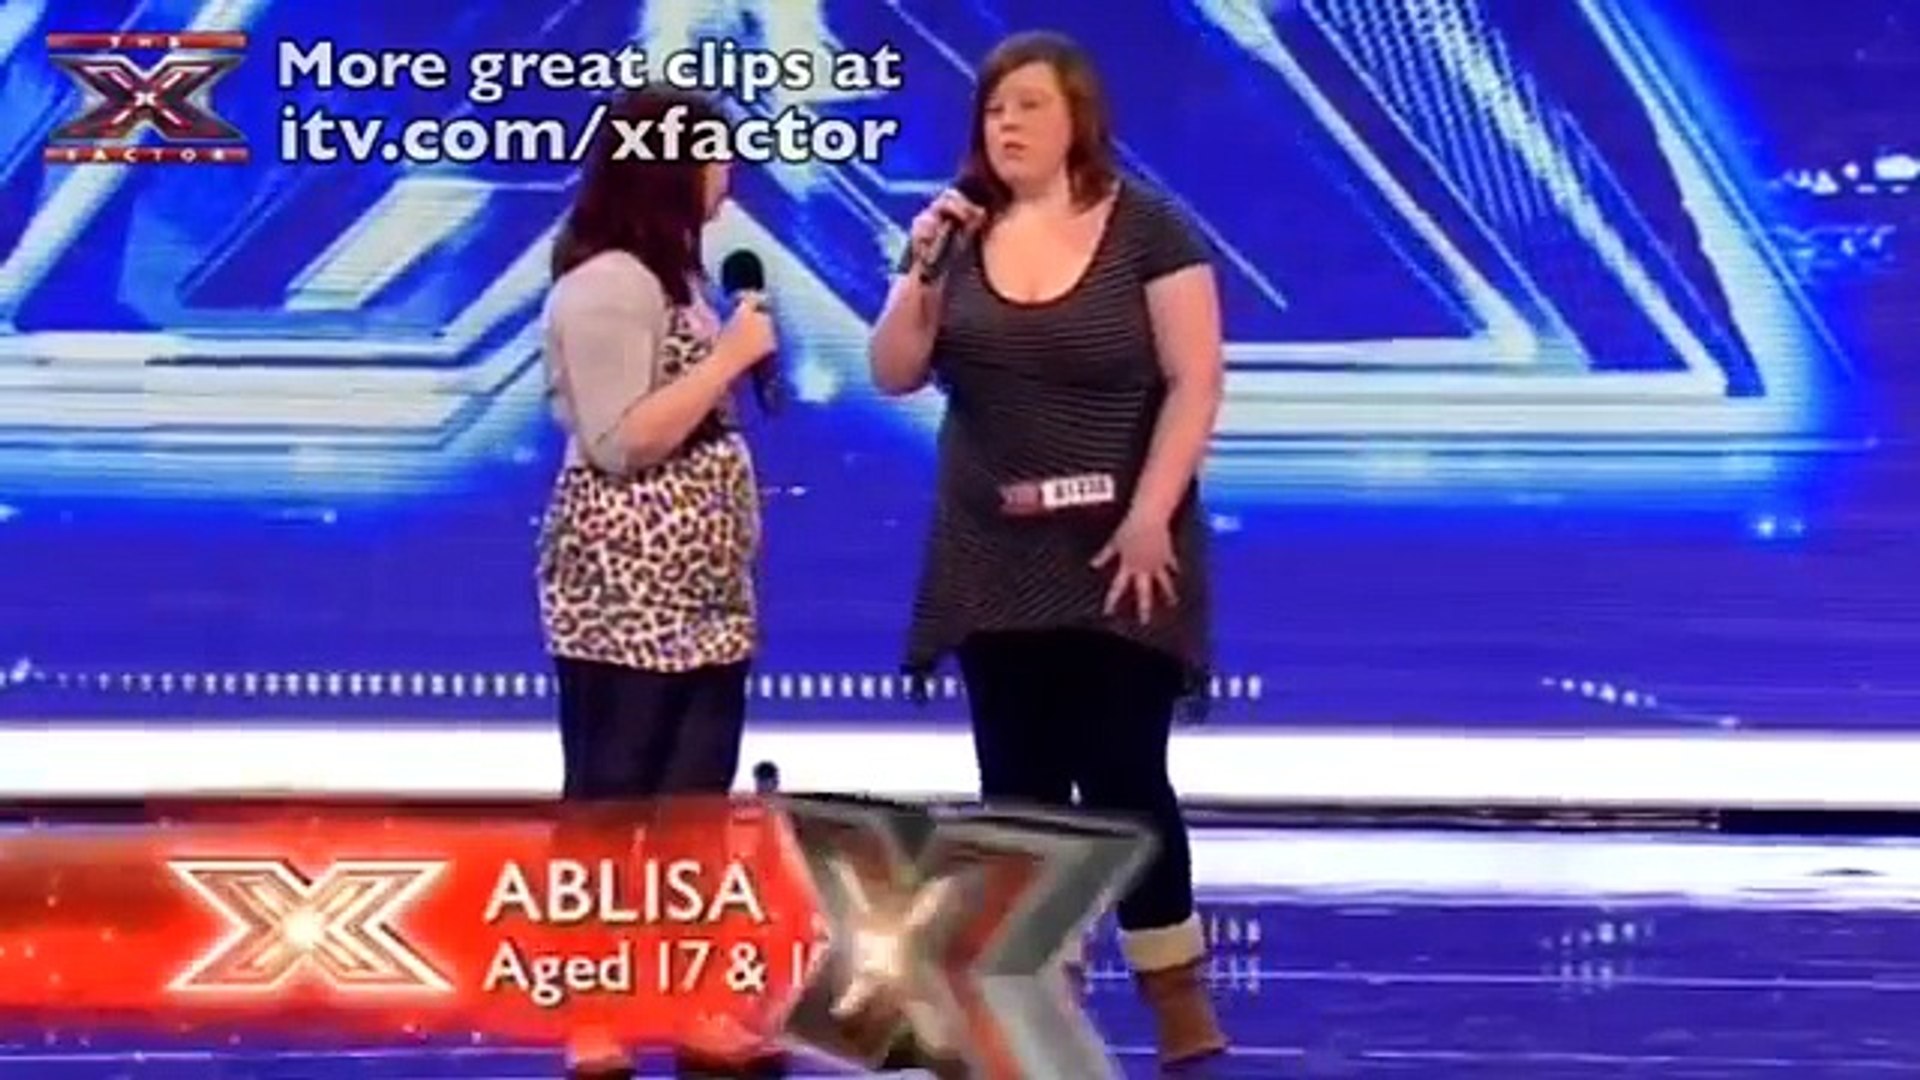 Ablisa's X Factor Audition (Full Version) - itv.com-xfactor (1) - video  Dailymotion